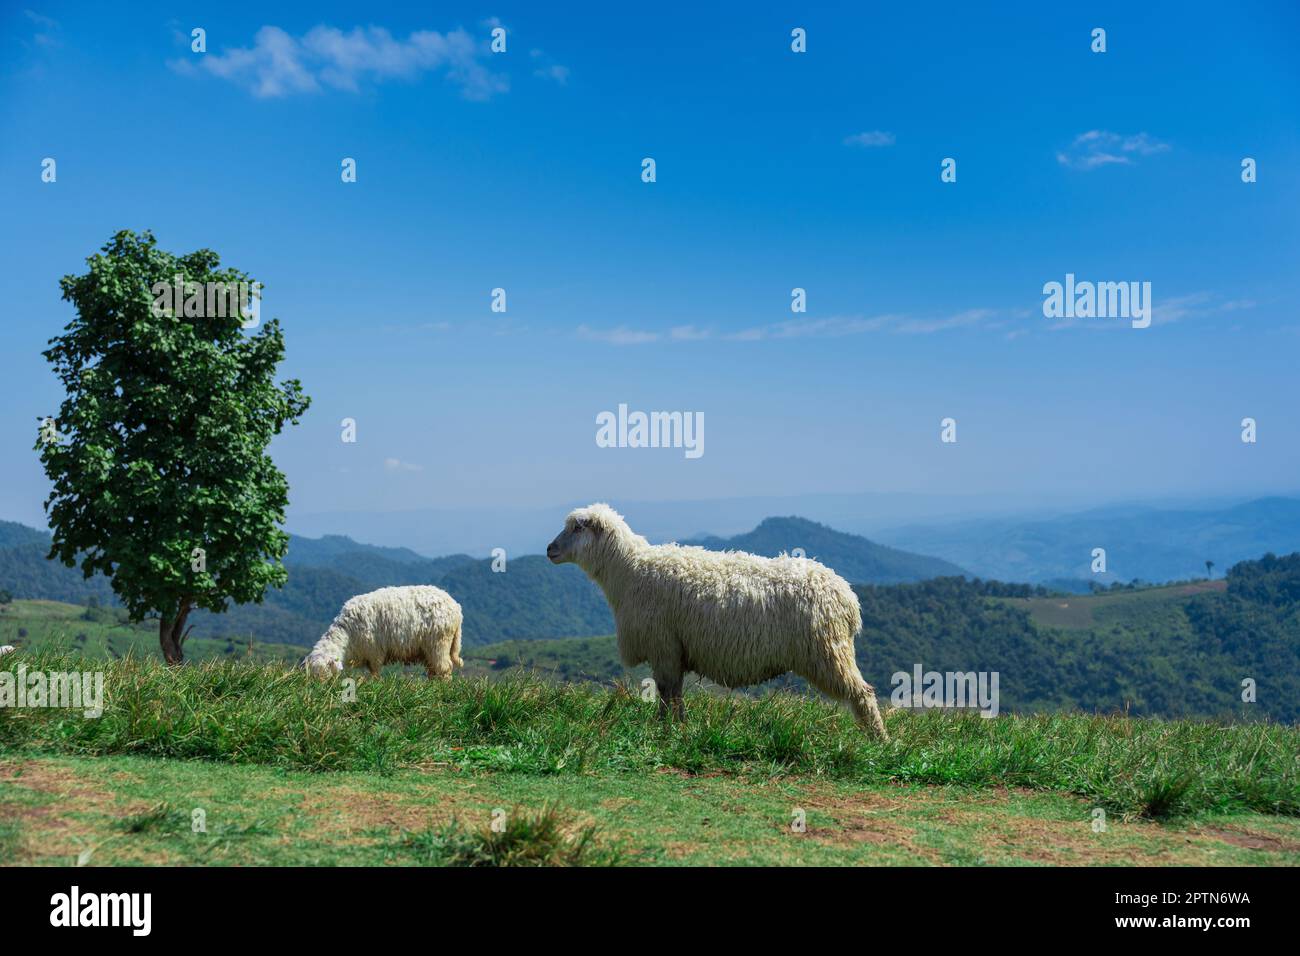 Sheep grazing in mountain meadow field with blue sky. Countryside landscape view background. Stock Photo